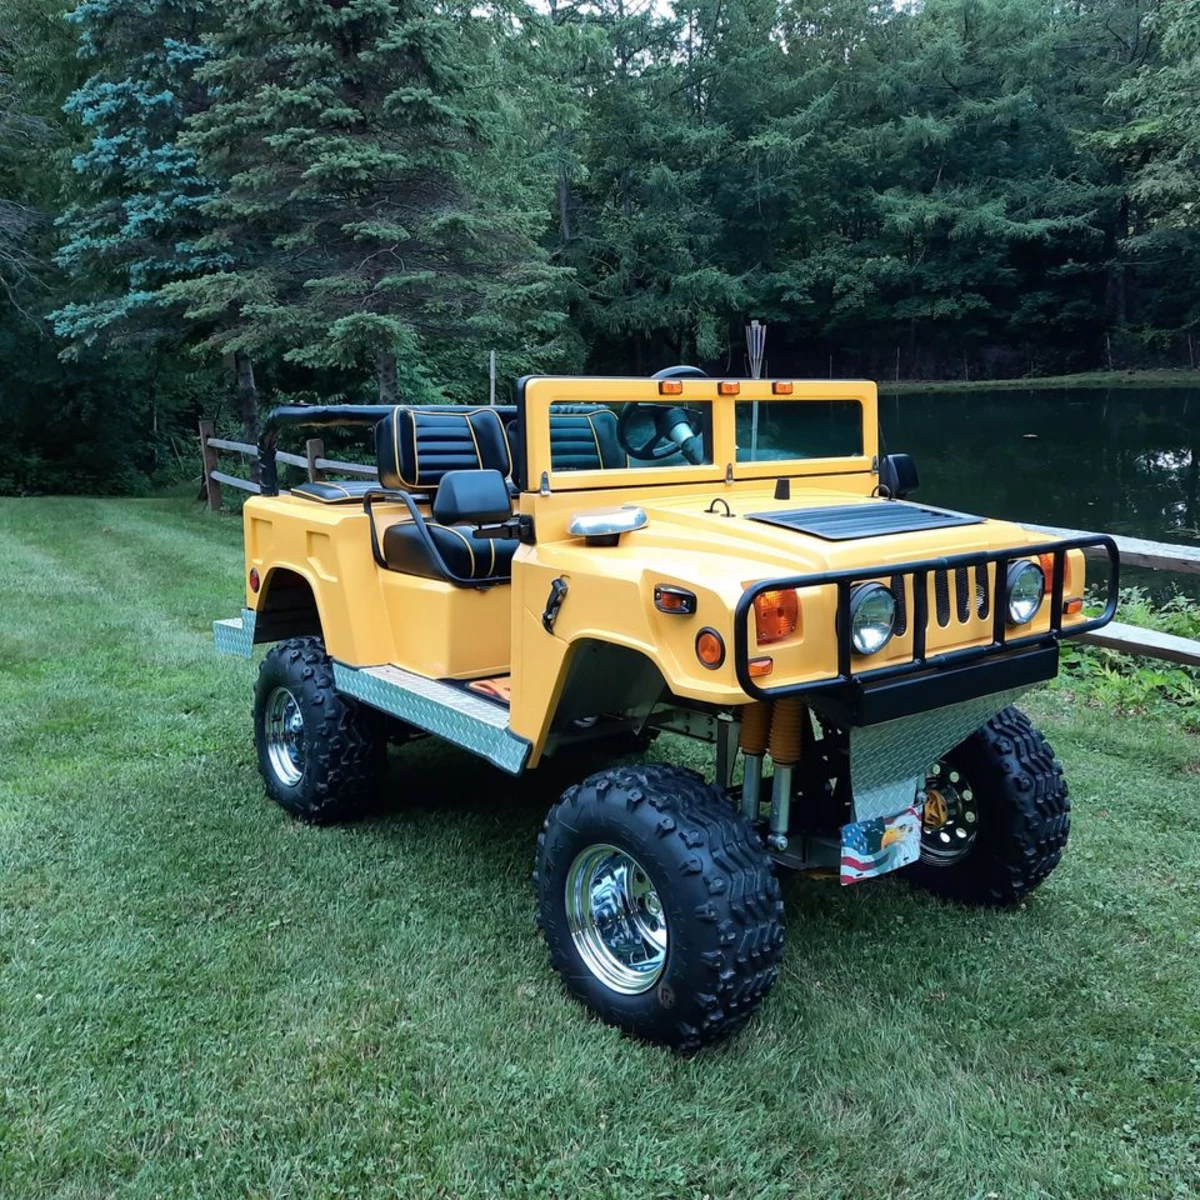 Shock and Awesome: Check Out This Hummer Golf Cart For Sale in E.